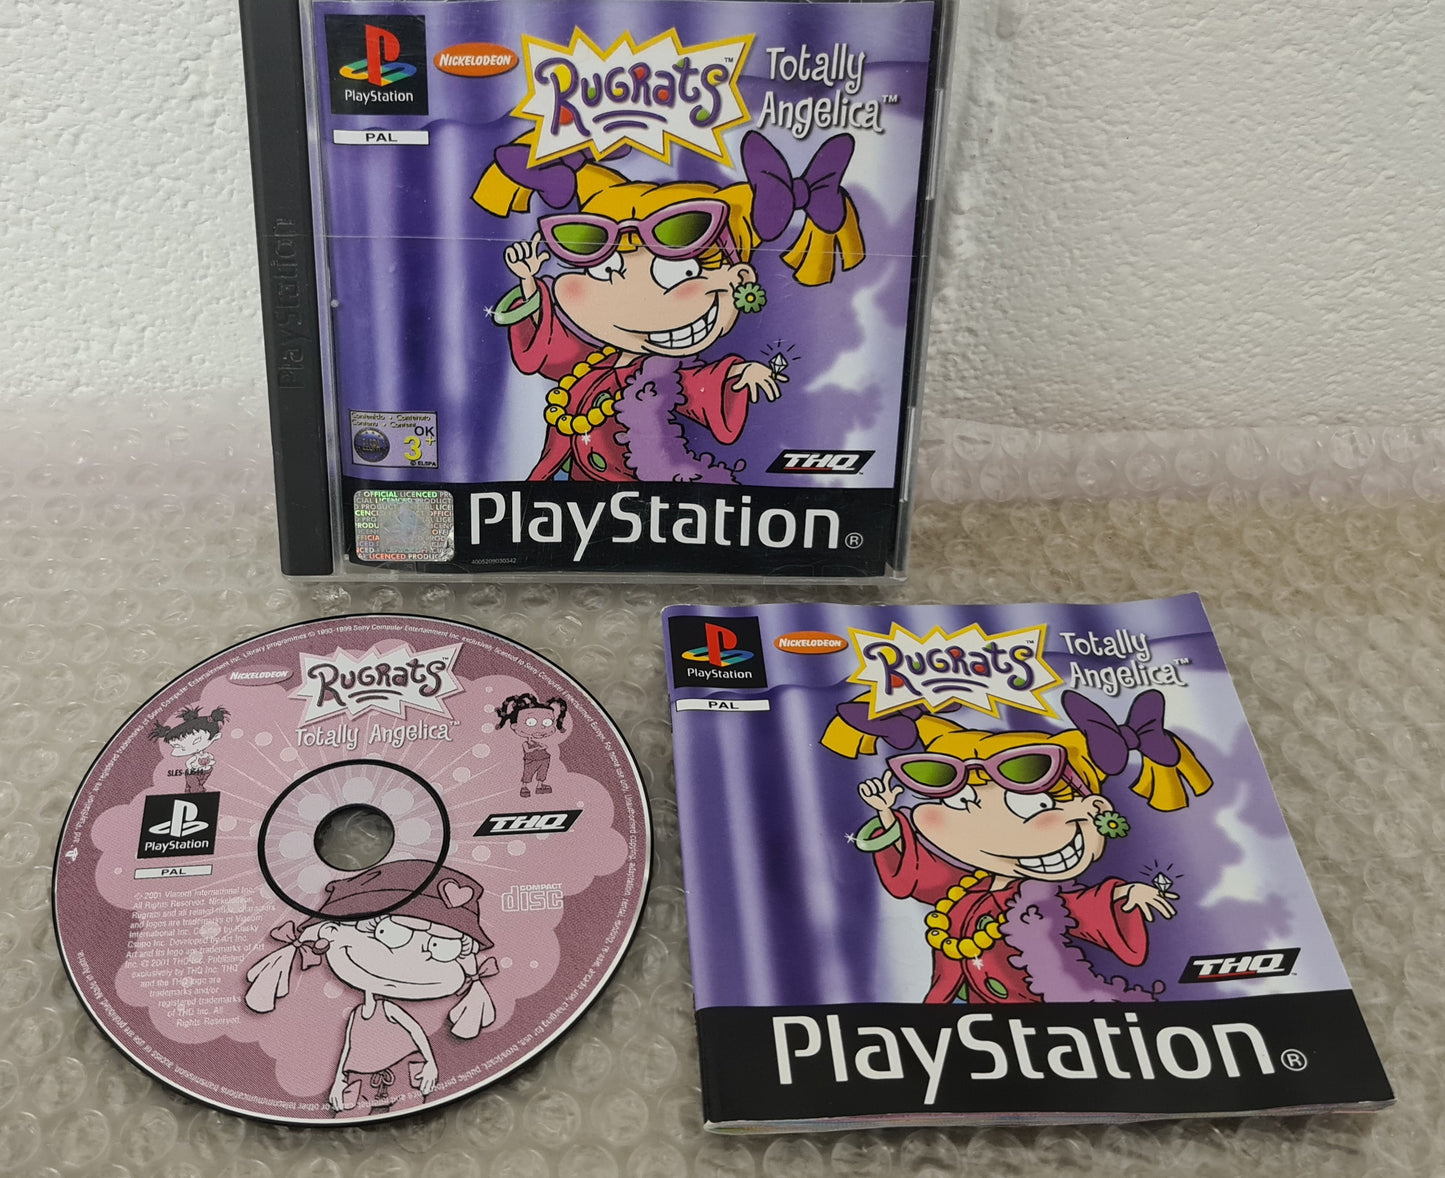 Rugrats Totally Angelica Sony Playstation 1 (PS1) Game